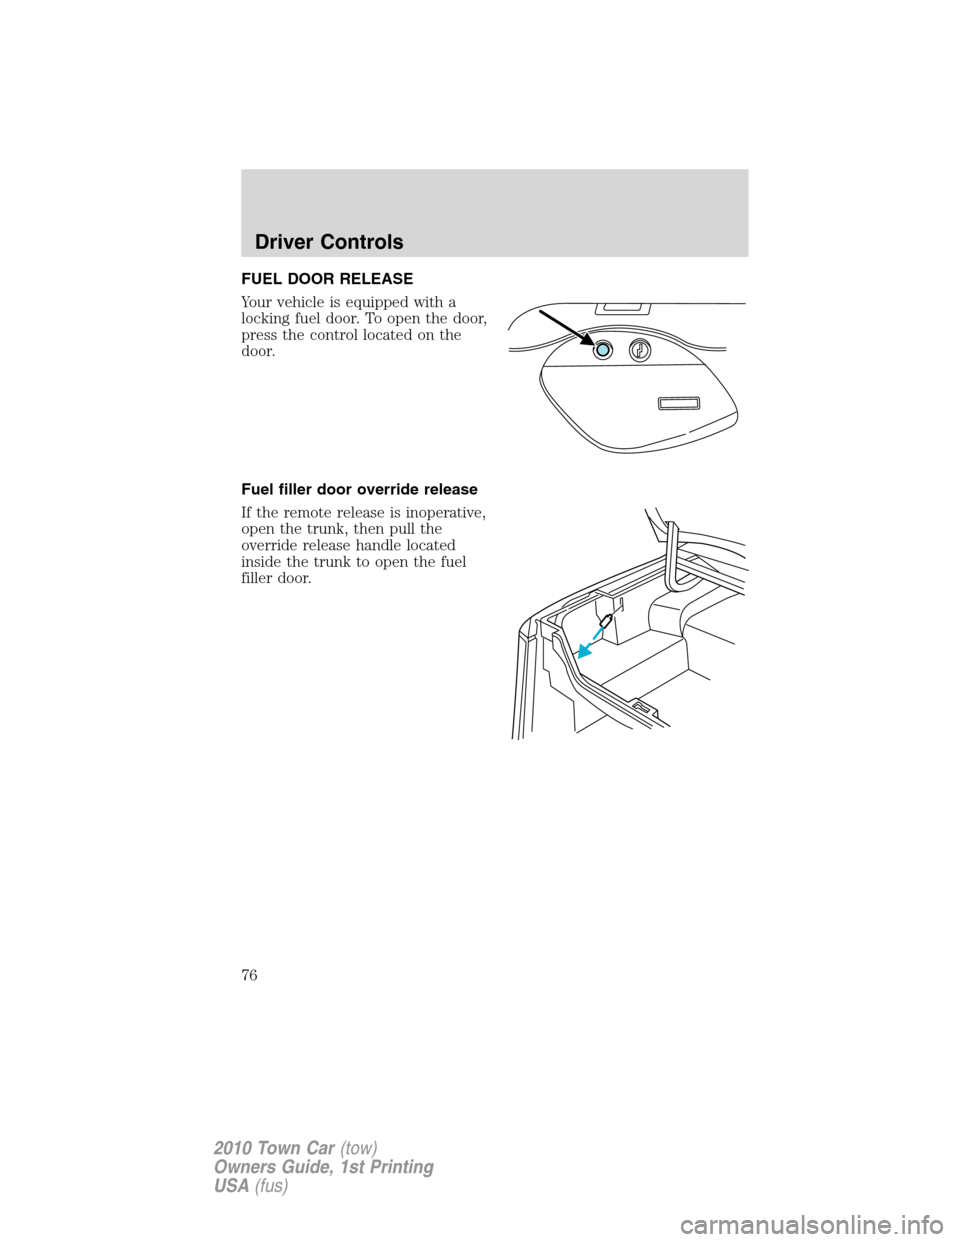 LINCOLN TOWN CAR 2010 Manual PDF FUEL DOOR RELEASE
Your vehicle is equipped with a
locking fuel door. To open the door,
press the control located on the
door.
Fuel filler door override release
If the remote release is inoperative,
op